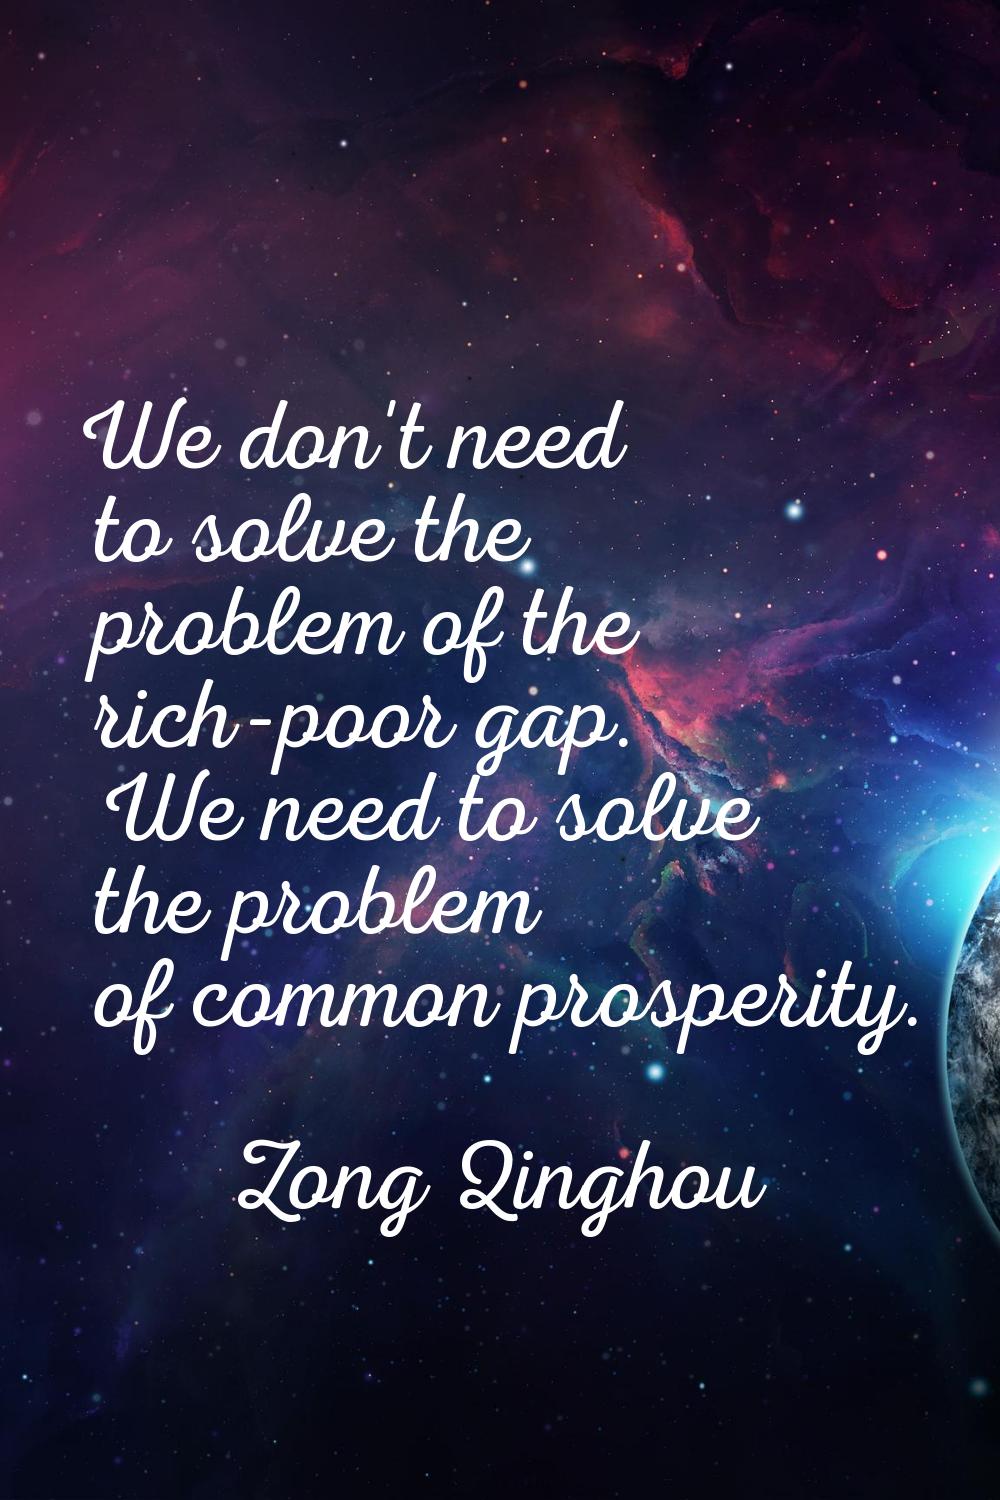 We don't need to solve the problem of the rich-poor gap. We need to solve the problem of common pro